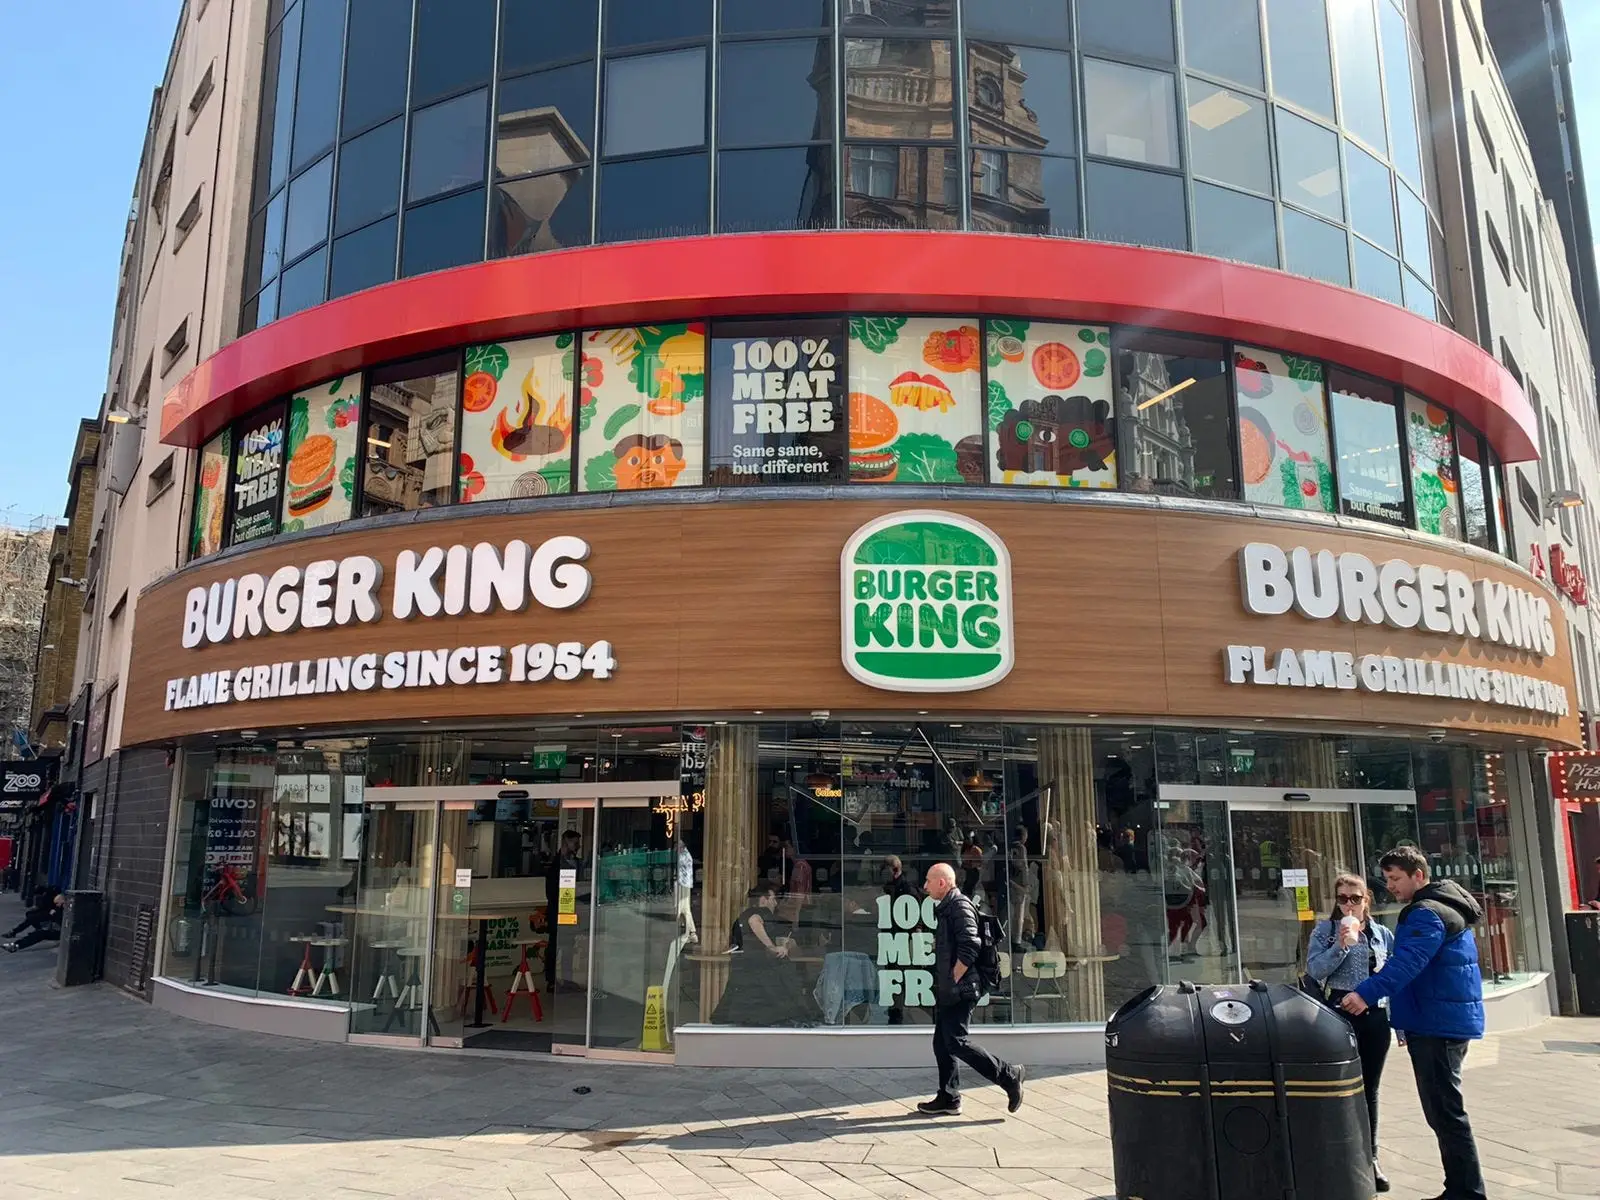 Burger King will spend $400 million to upgrade its reputation by renovating and relocating stores as well as doubling down on ads